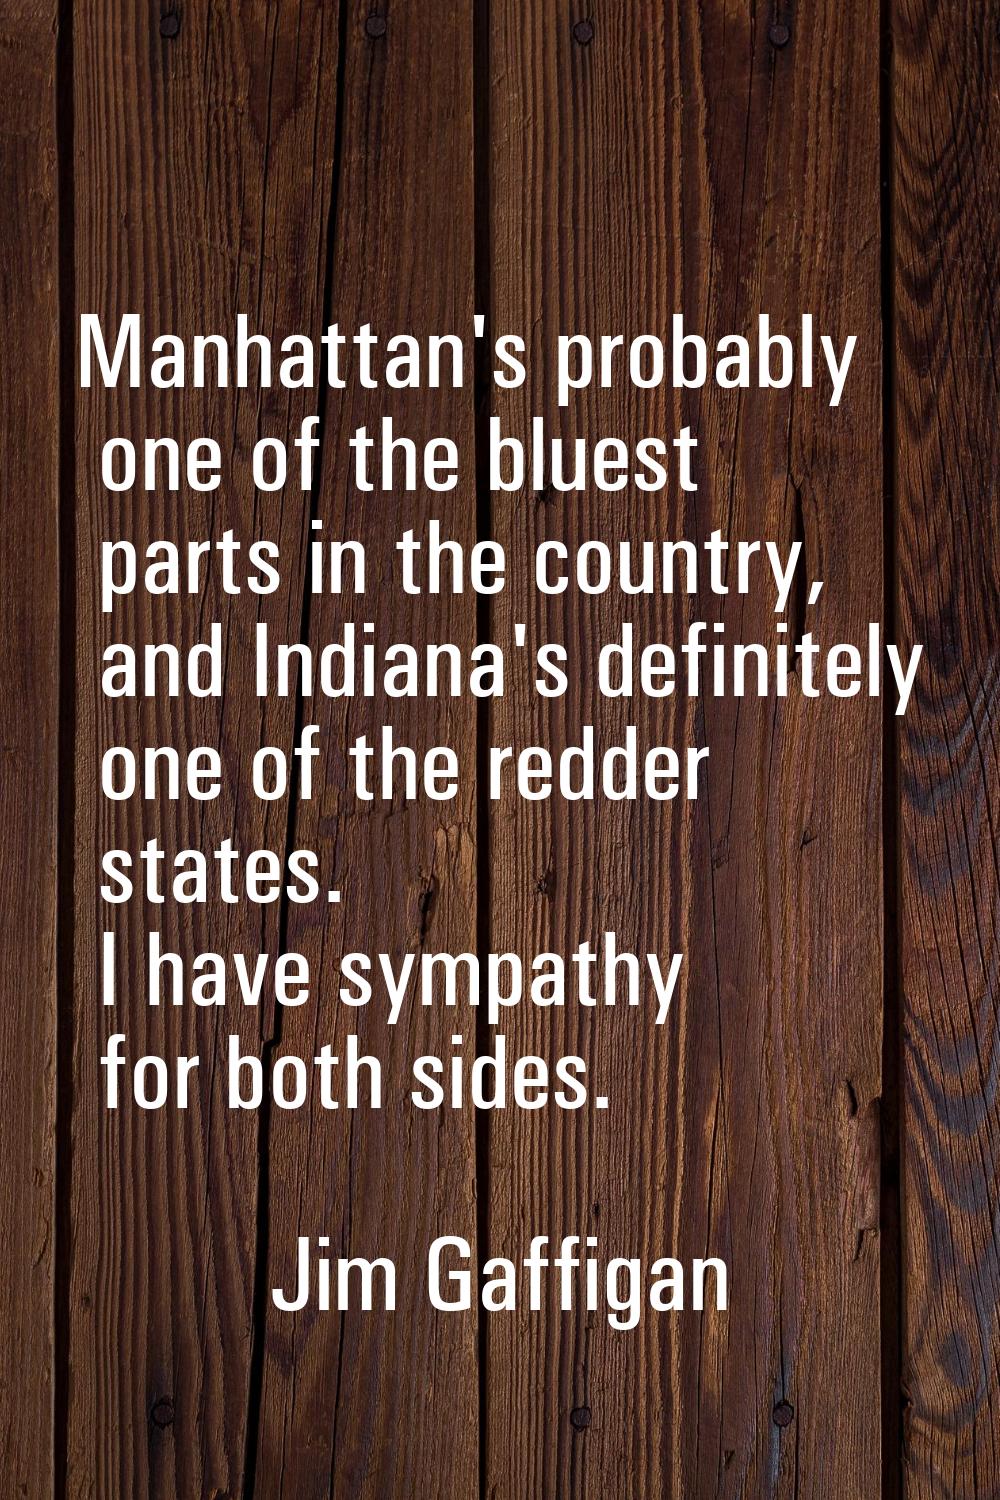 Manhattan's probably one of the bluest parts in the country, and Indiana's definitely one of the re